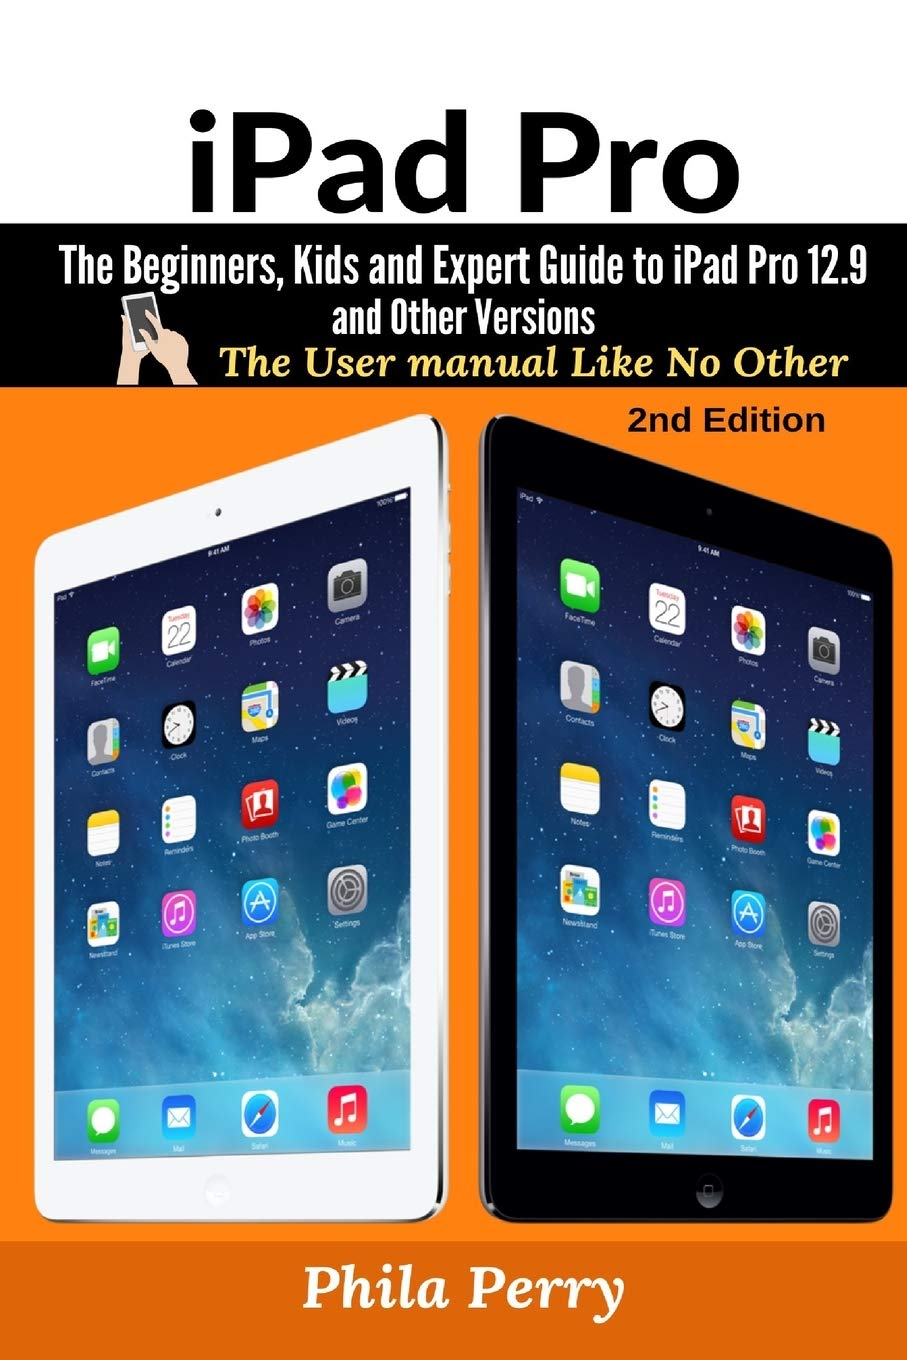 iPad Pro: The Beginners, Kids and Expert Guide to iPad Pro 12.9 and Other Versions (The User Manual Like No Other)